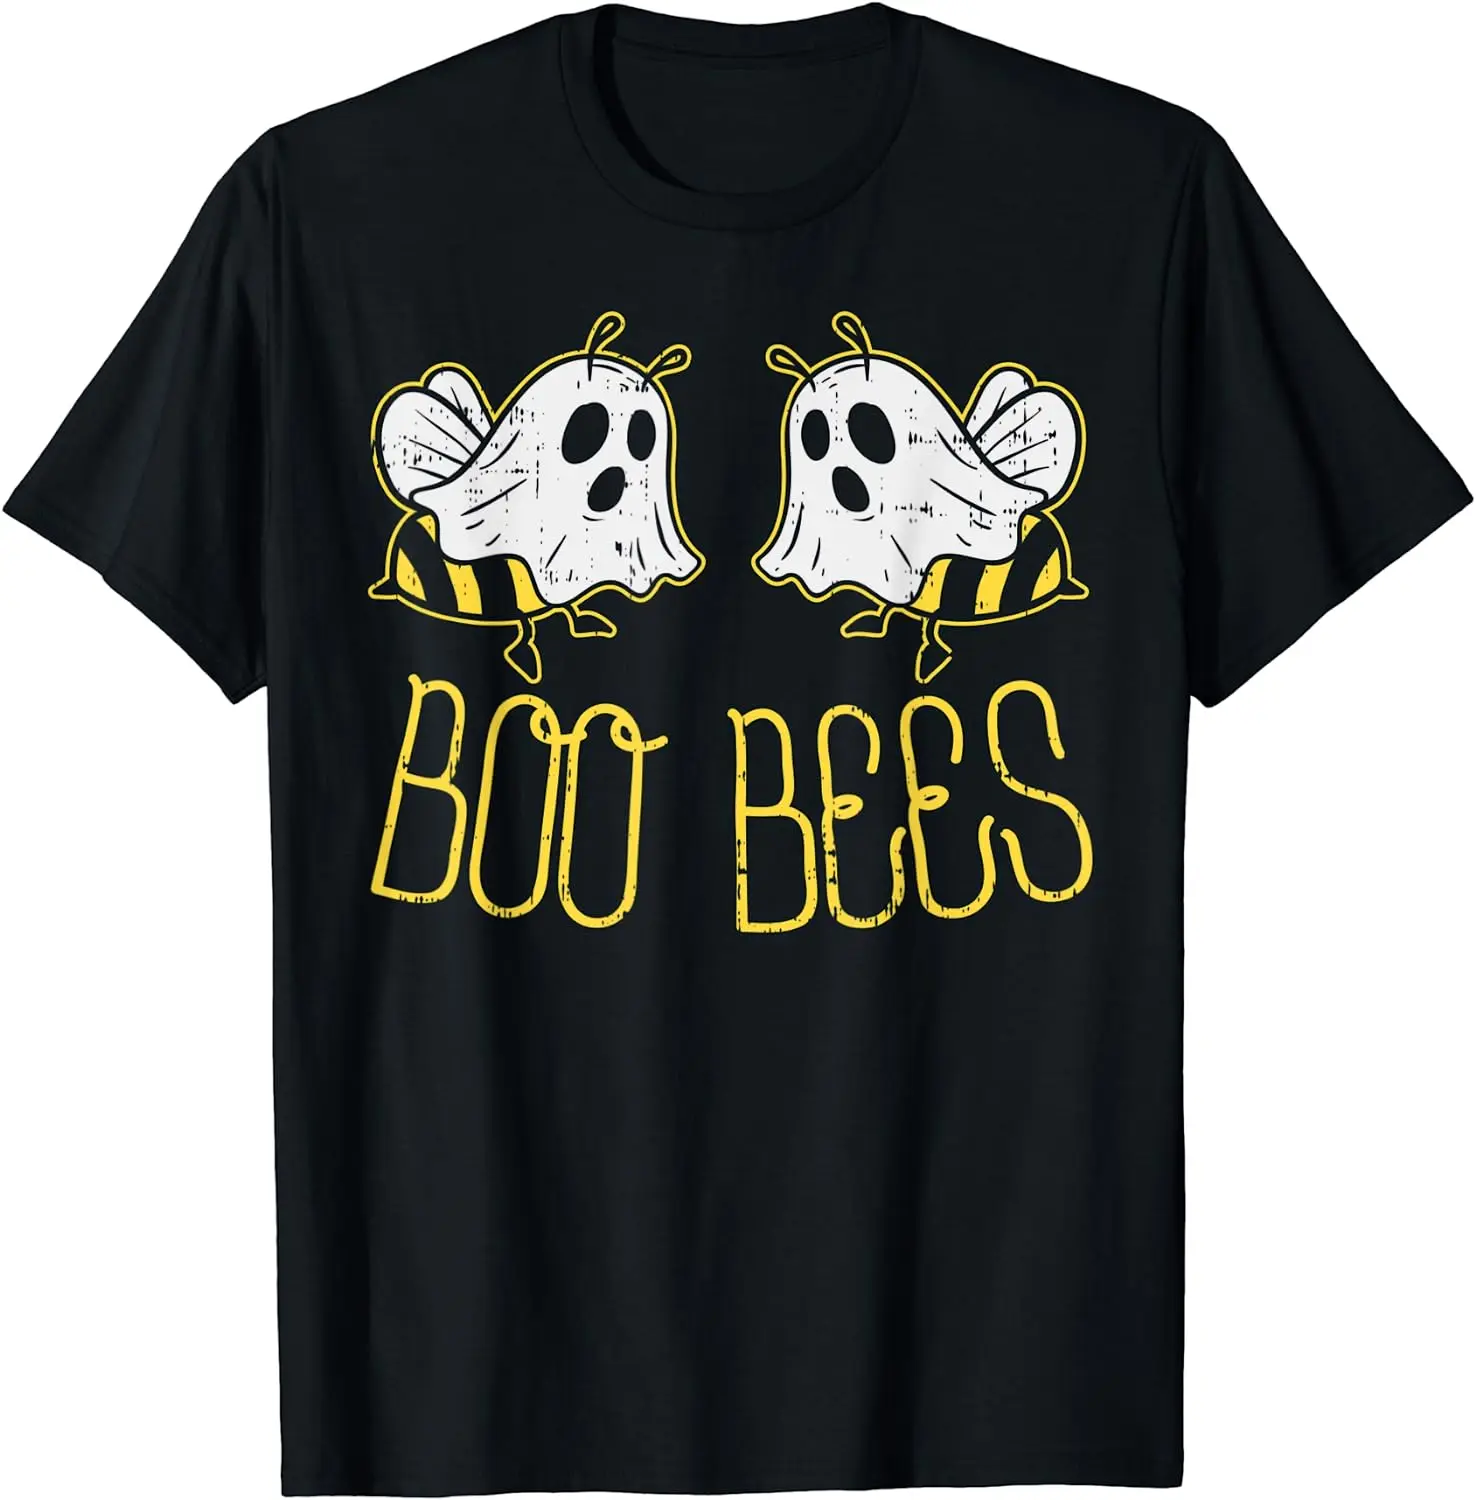 

Boo Bees Funny Couples Halloween Costume for Adult Men Women Kids T-Shirt Cartoon Casual Cotton Anime Clothes Tees Daily